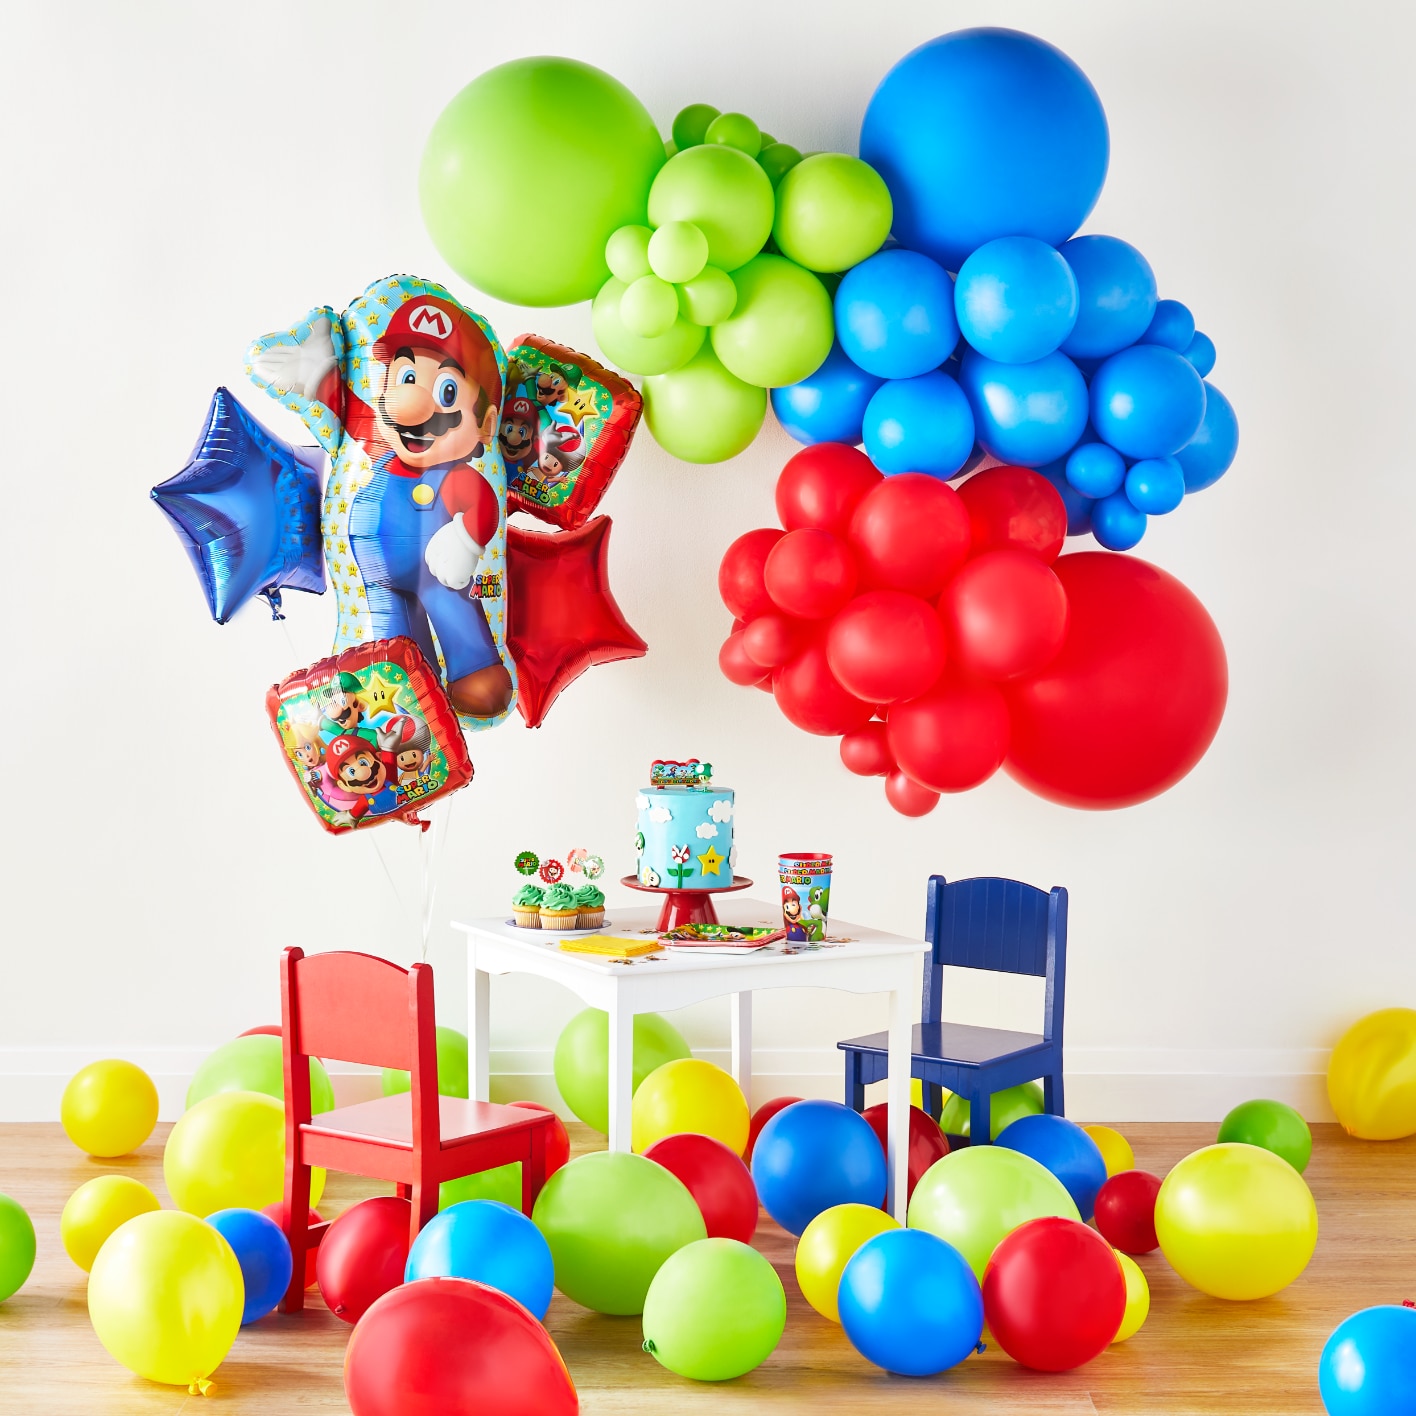 Blue, green and yellow Super Mario balloons with party decorations atop a white kids table.